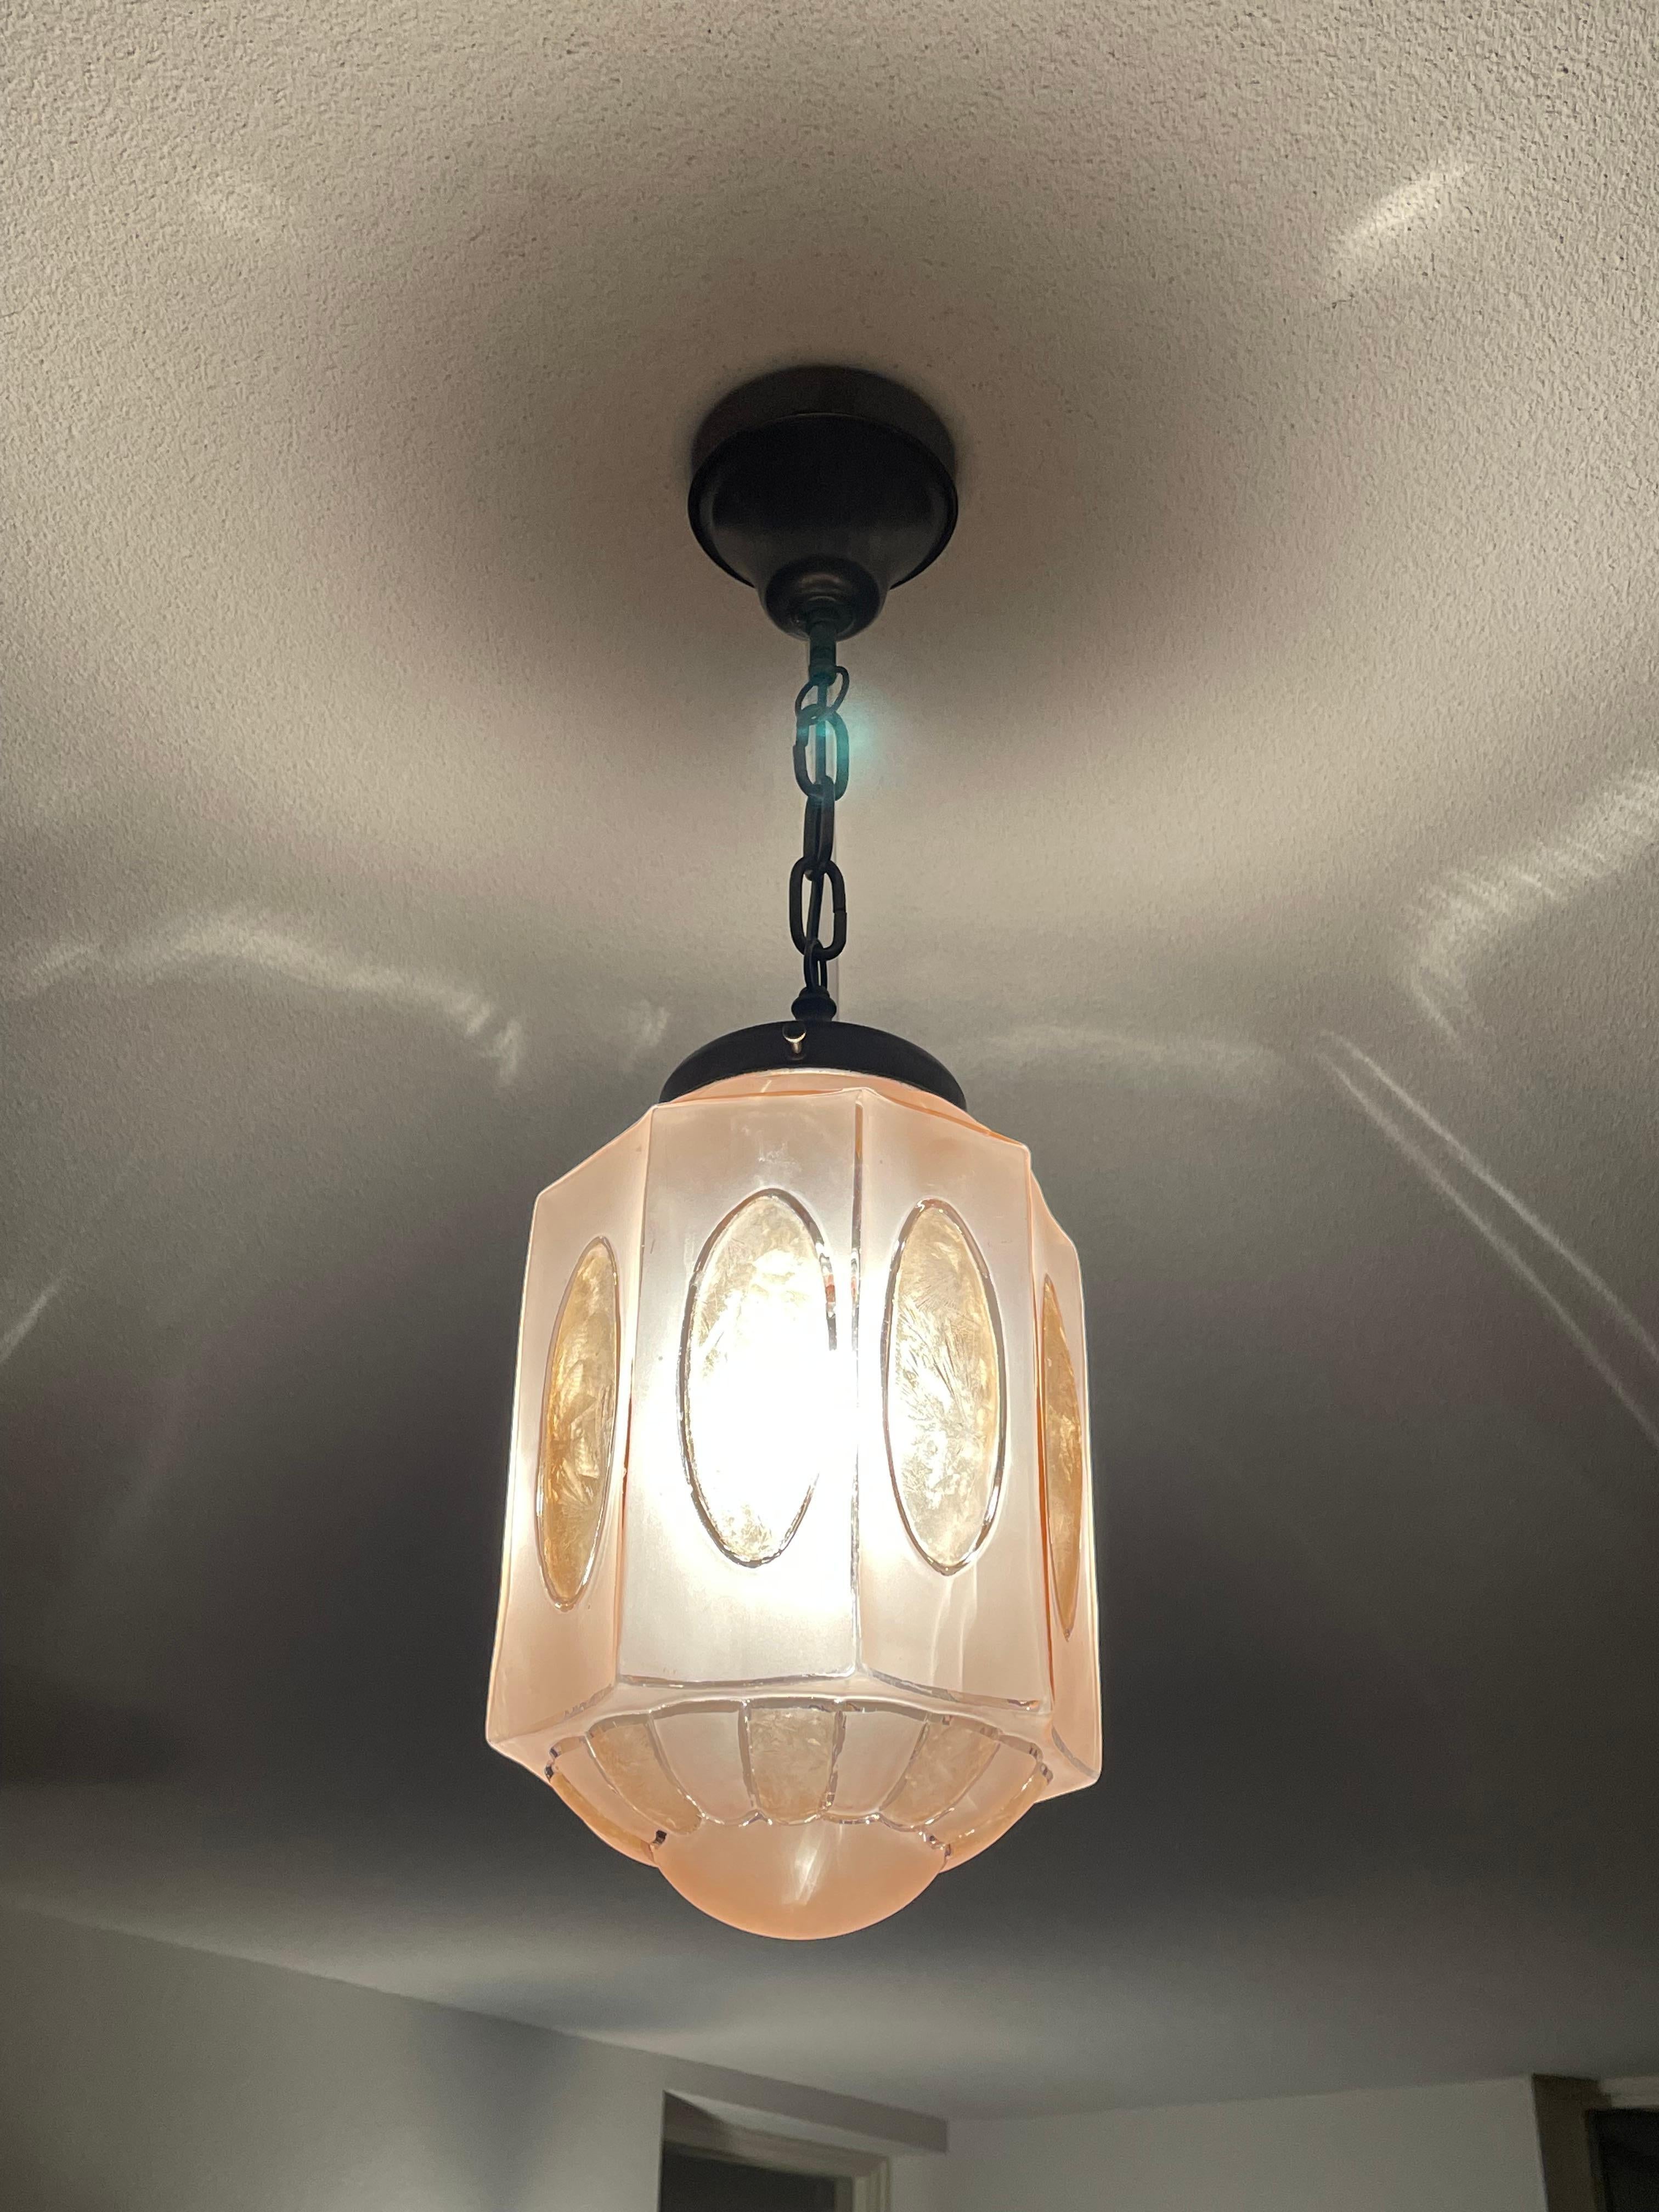 Rare Art Deco Pendant Light Fixture w. Octagonal Satinated & Frosted Glass Shade For Sale 7